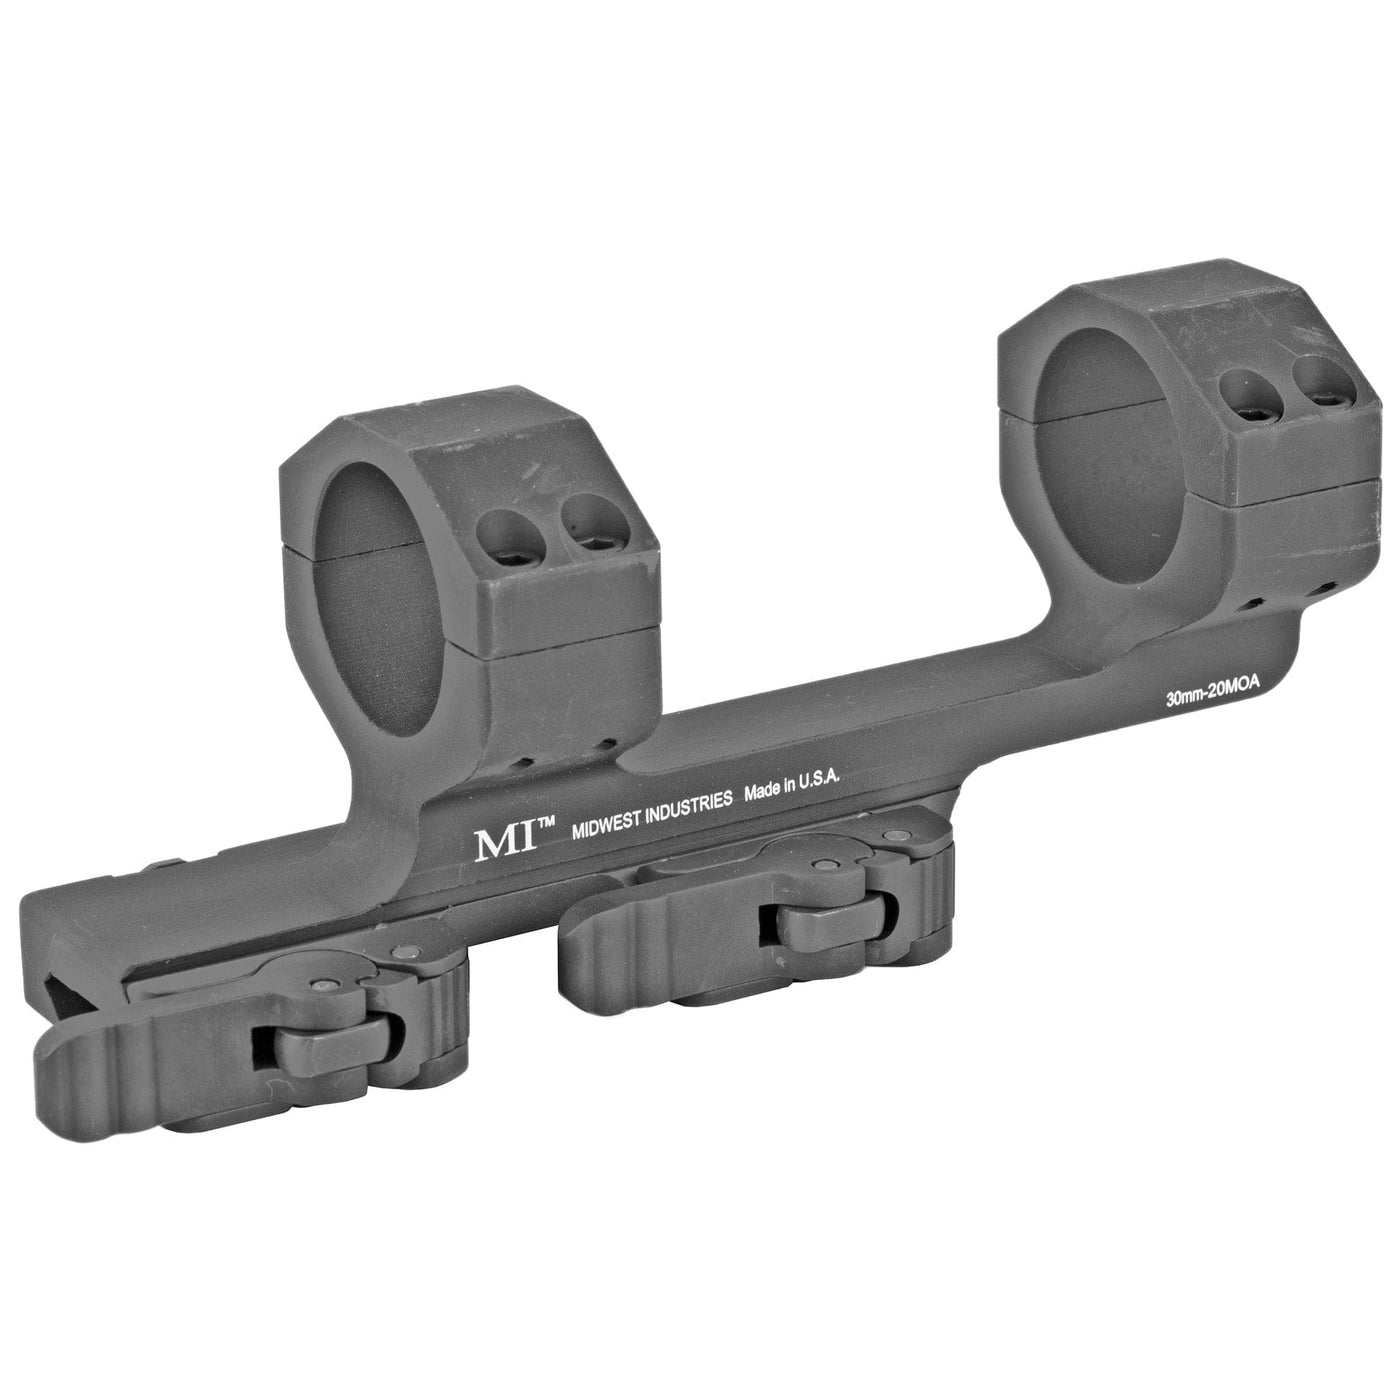 Midwest Industries Midwest 30mm Qd Scope Mount - 20moa Scope Mounts